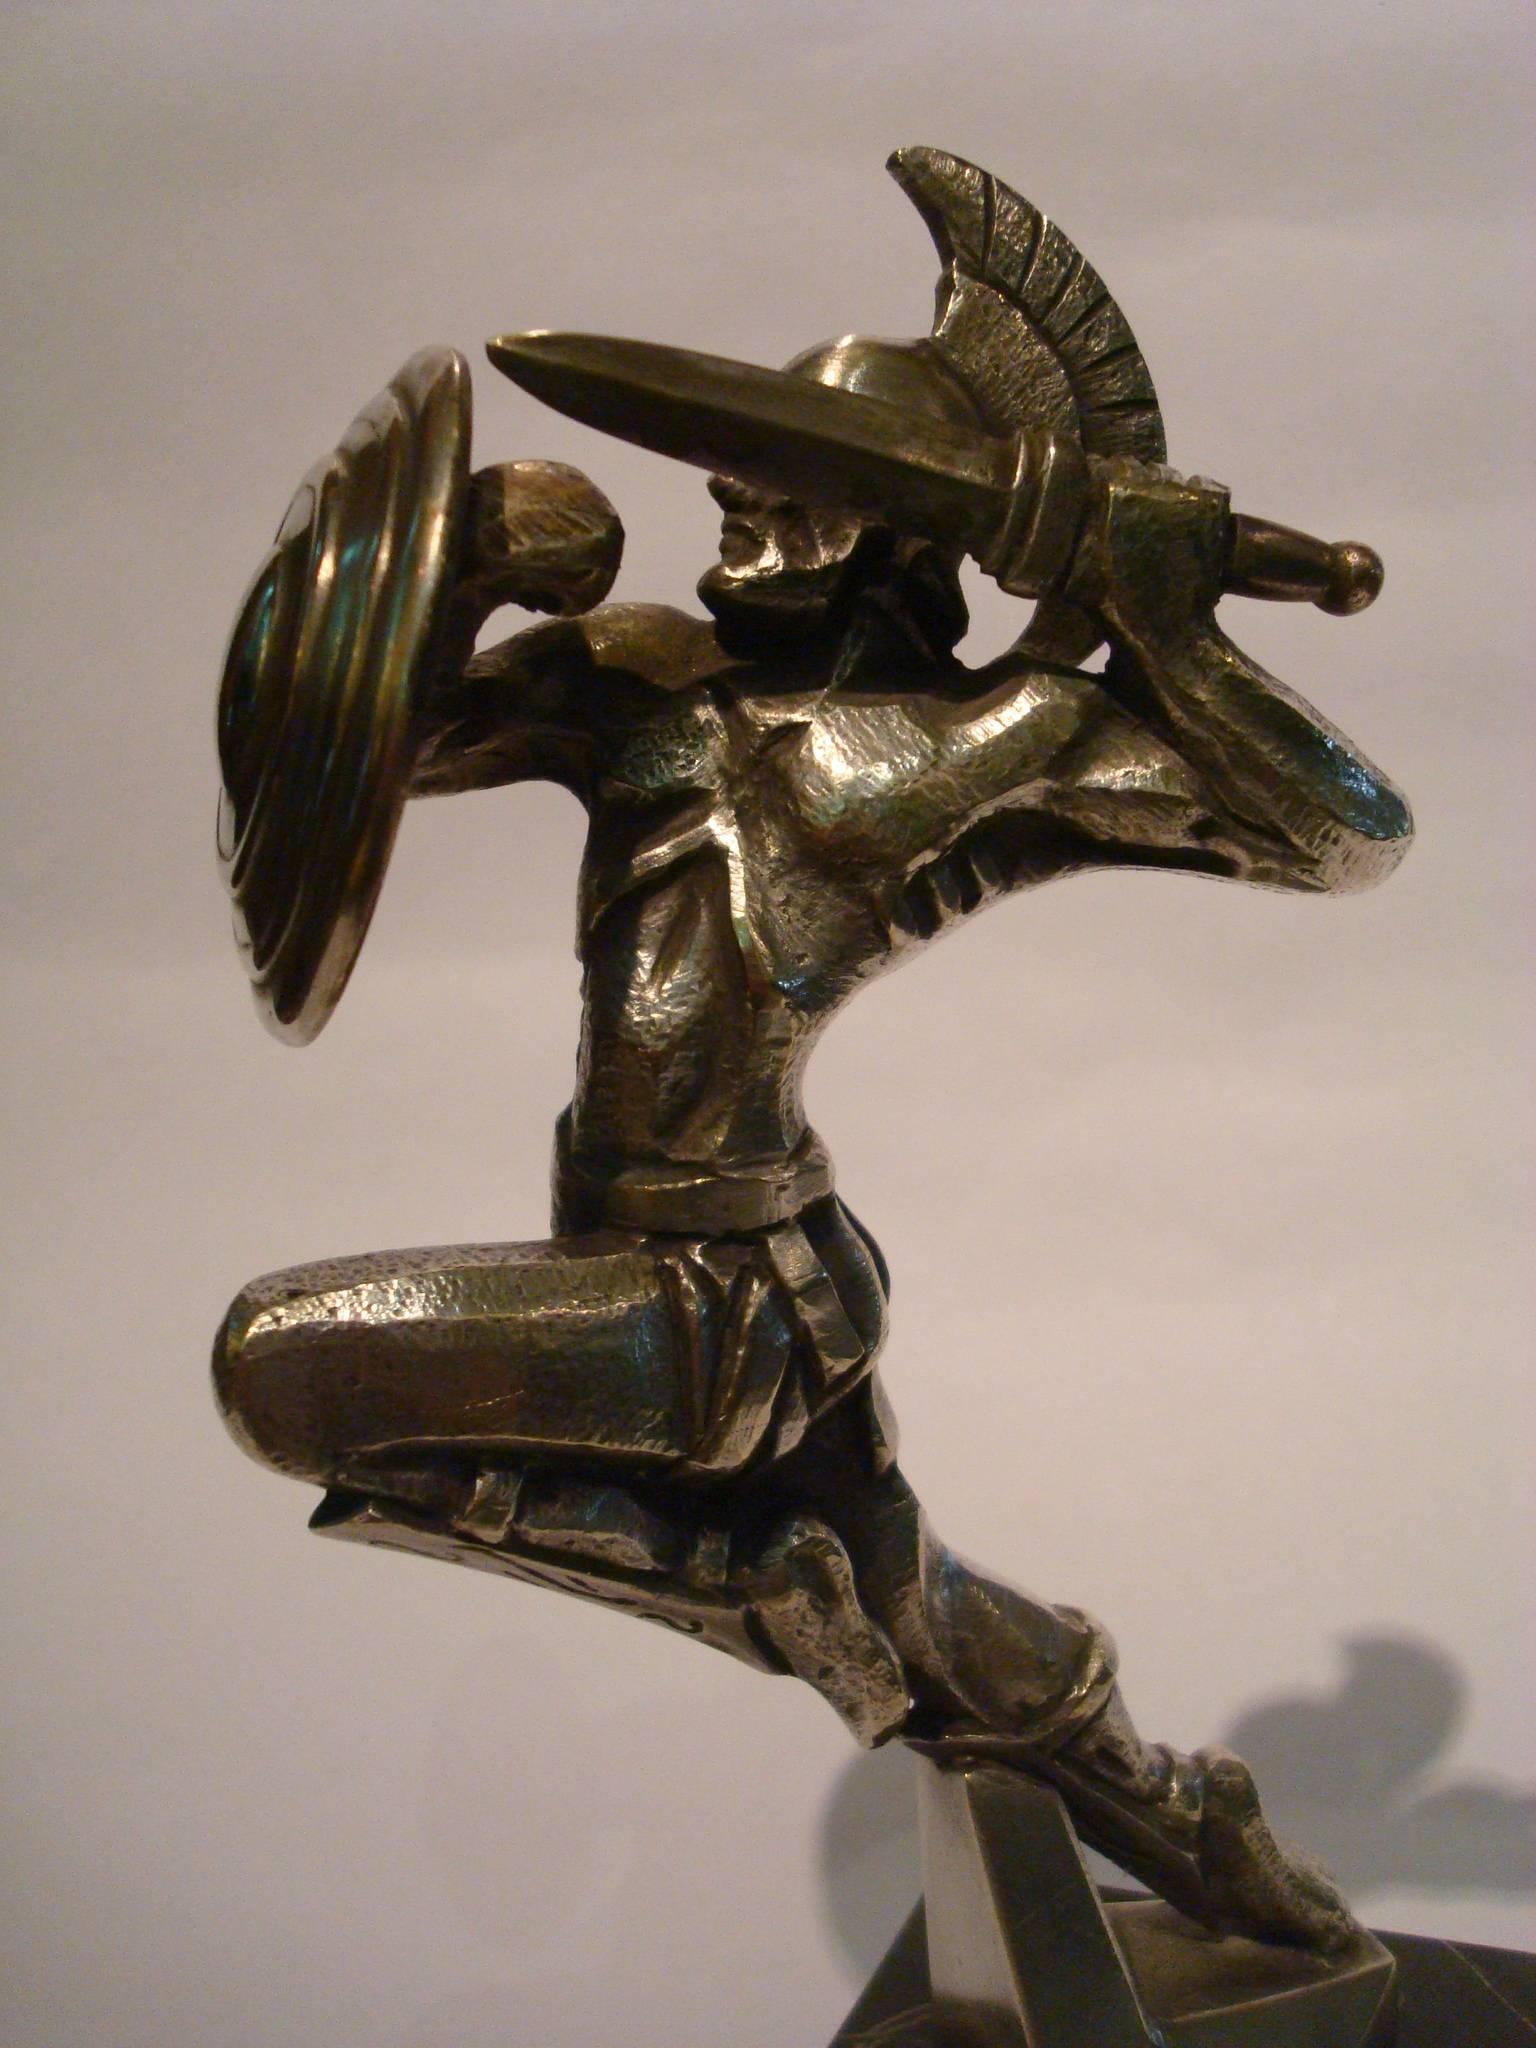 Fantastic Art Deco Gladiator car mascot. Signed R. Varnier. 
Varnier was the sculptor, M. Bonnot the editer. This piece was also distributed by Marvel. Made in France 1920-1925.
Made of bronze. Mounted over a marble base. You can find a similar